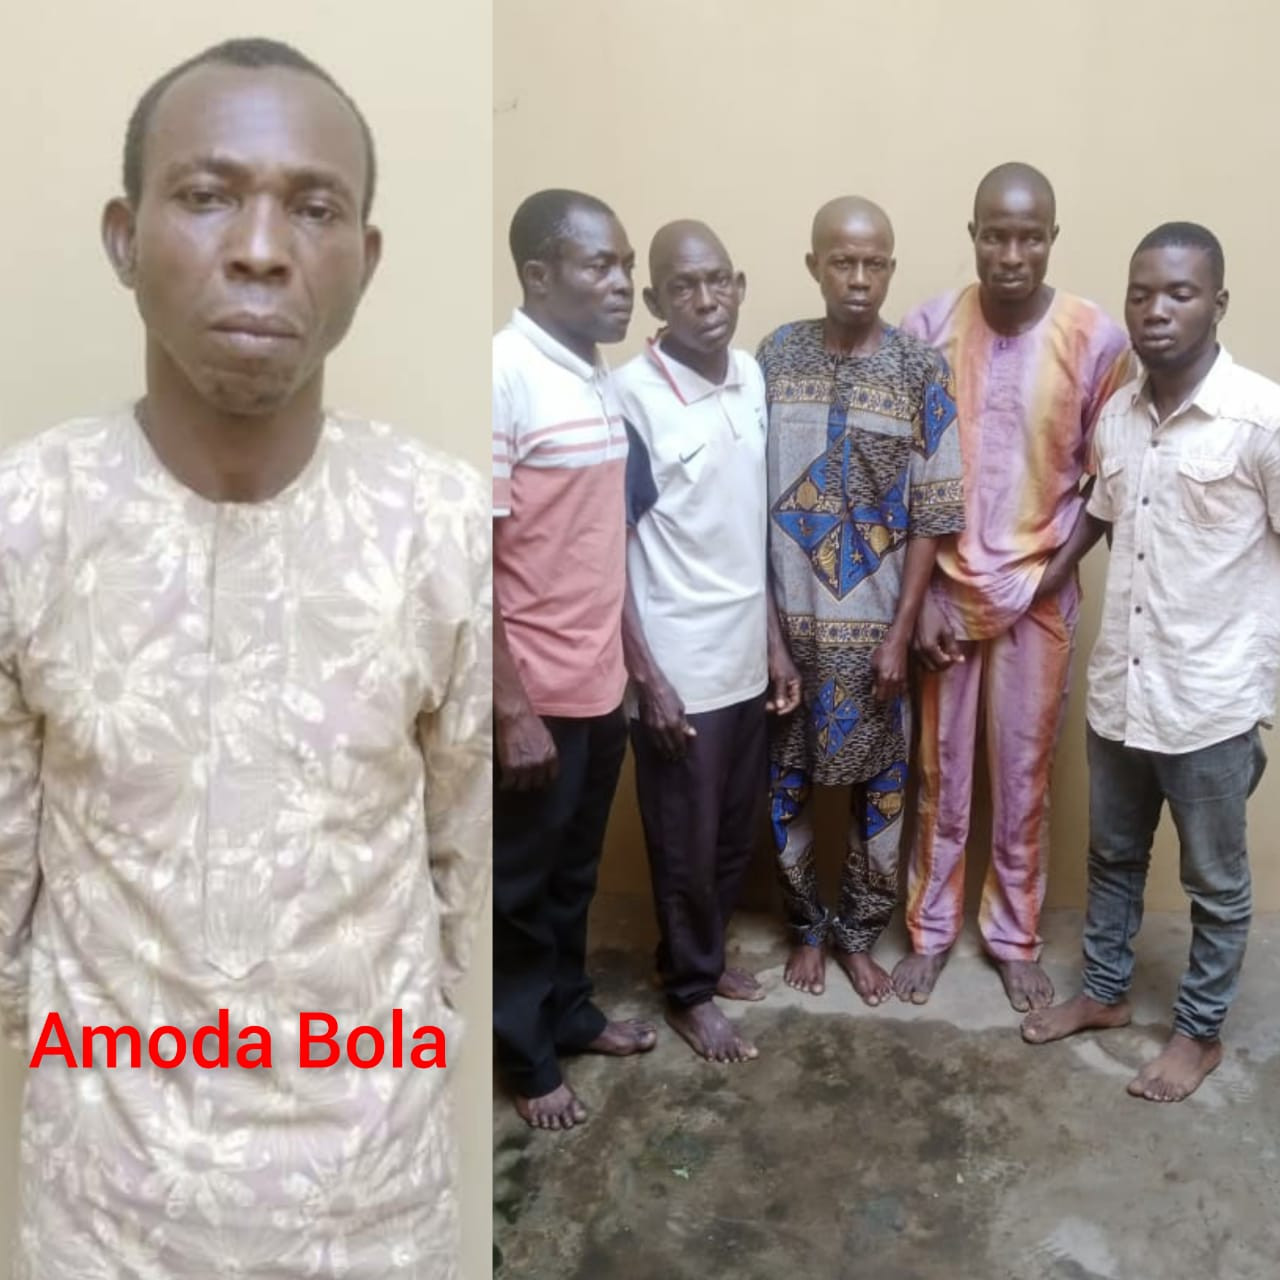 Man arrested for impregnating his daughter and forcing her into prostitution in Ogun